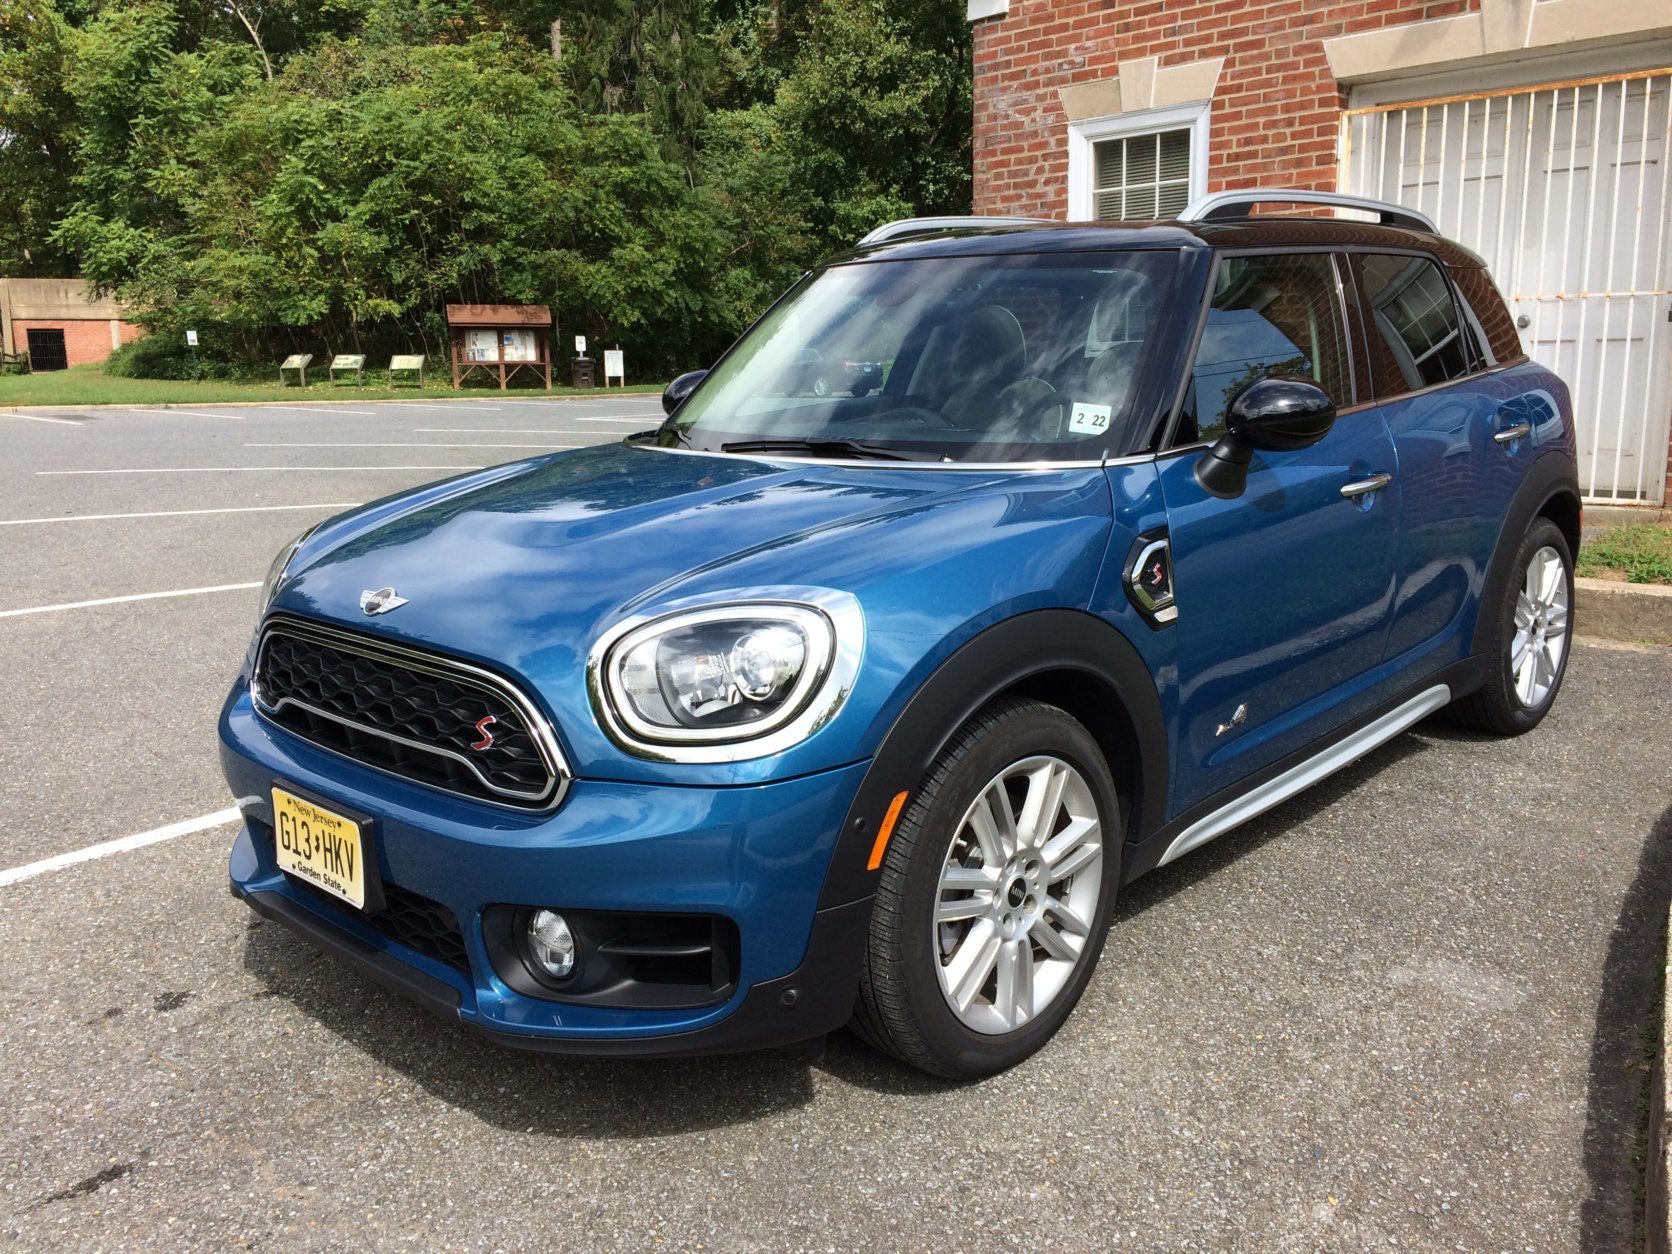 The large Cooper S Countryman still looks like a Mini - just taller and longer. The S version also looks racier with large LED fog lights and the blacked out egg crate grill. (WTOP/Mike Parris)